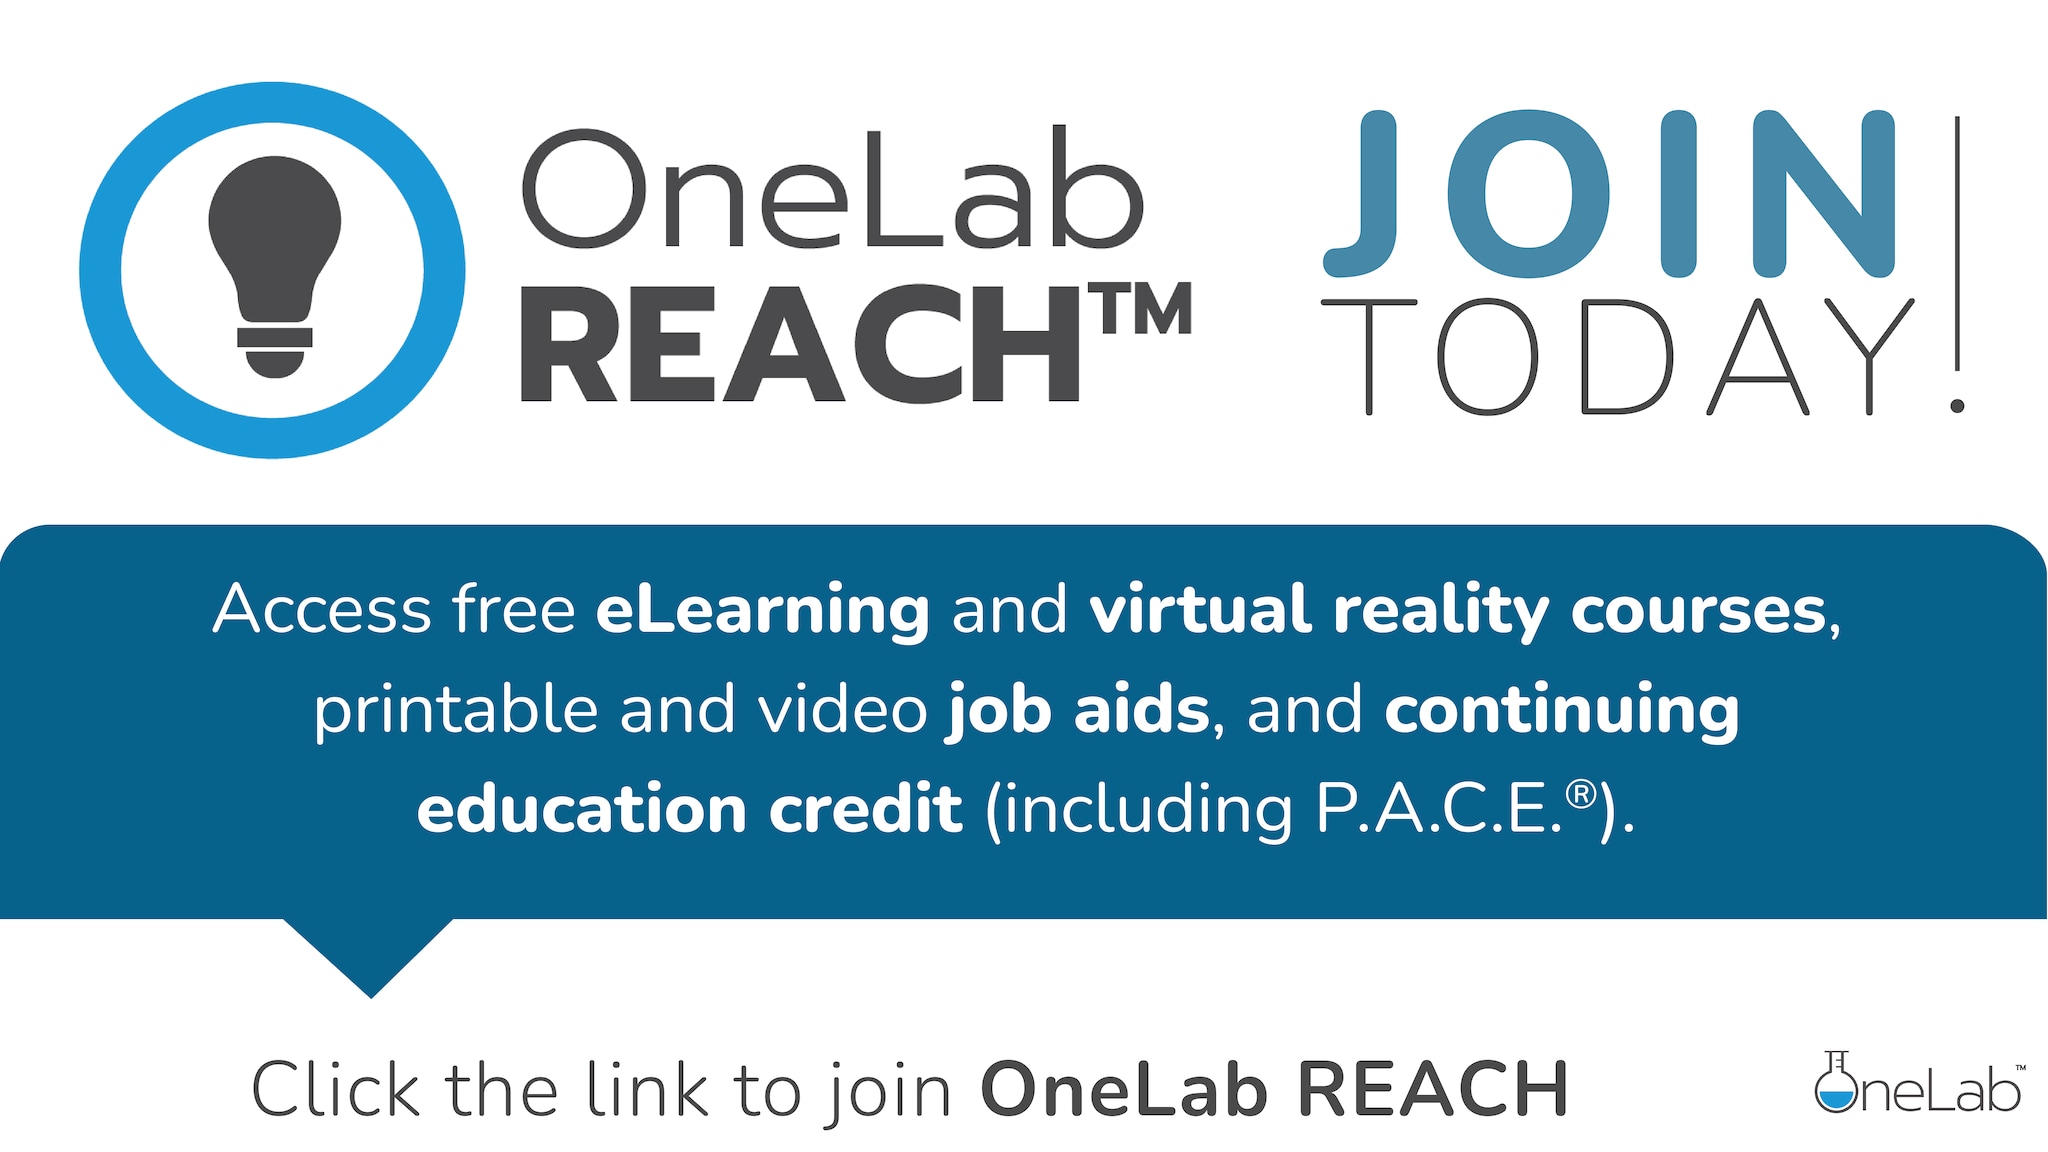 Blue, black, and green text graphic with call to action for users to click the link to join OneLab REACH.